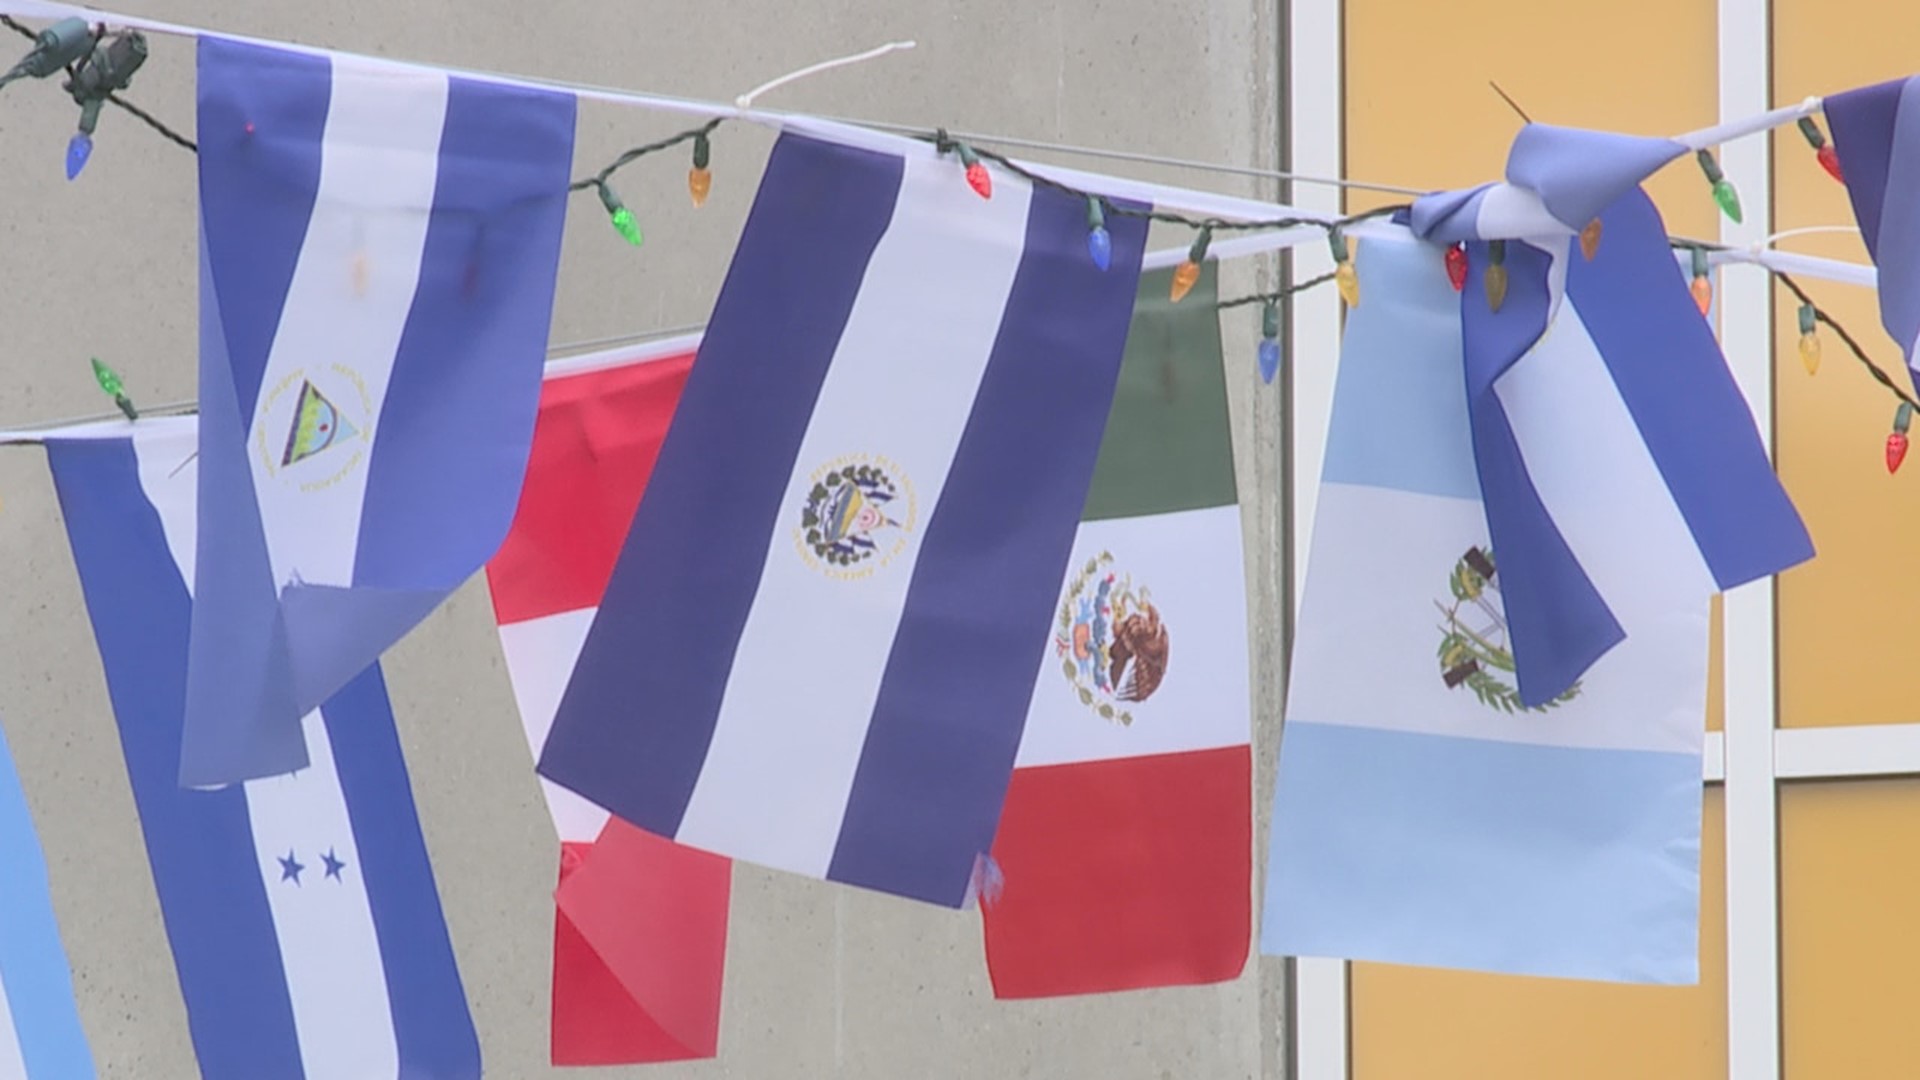 The city of Lancaster hosted its second annual Hispanic Heritage Festival on Saturday and welcomes thousands of guests from all walks of life.